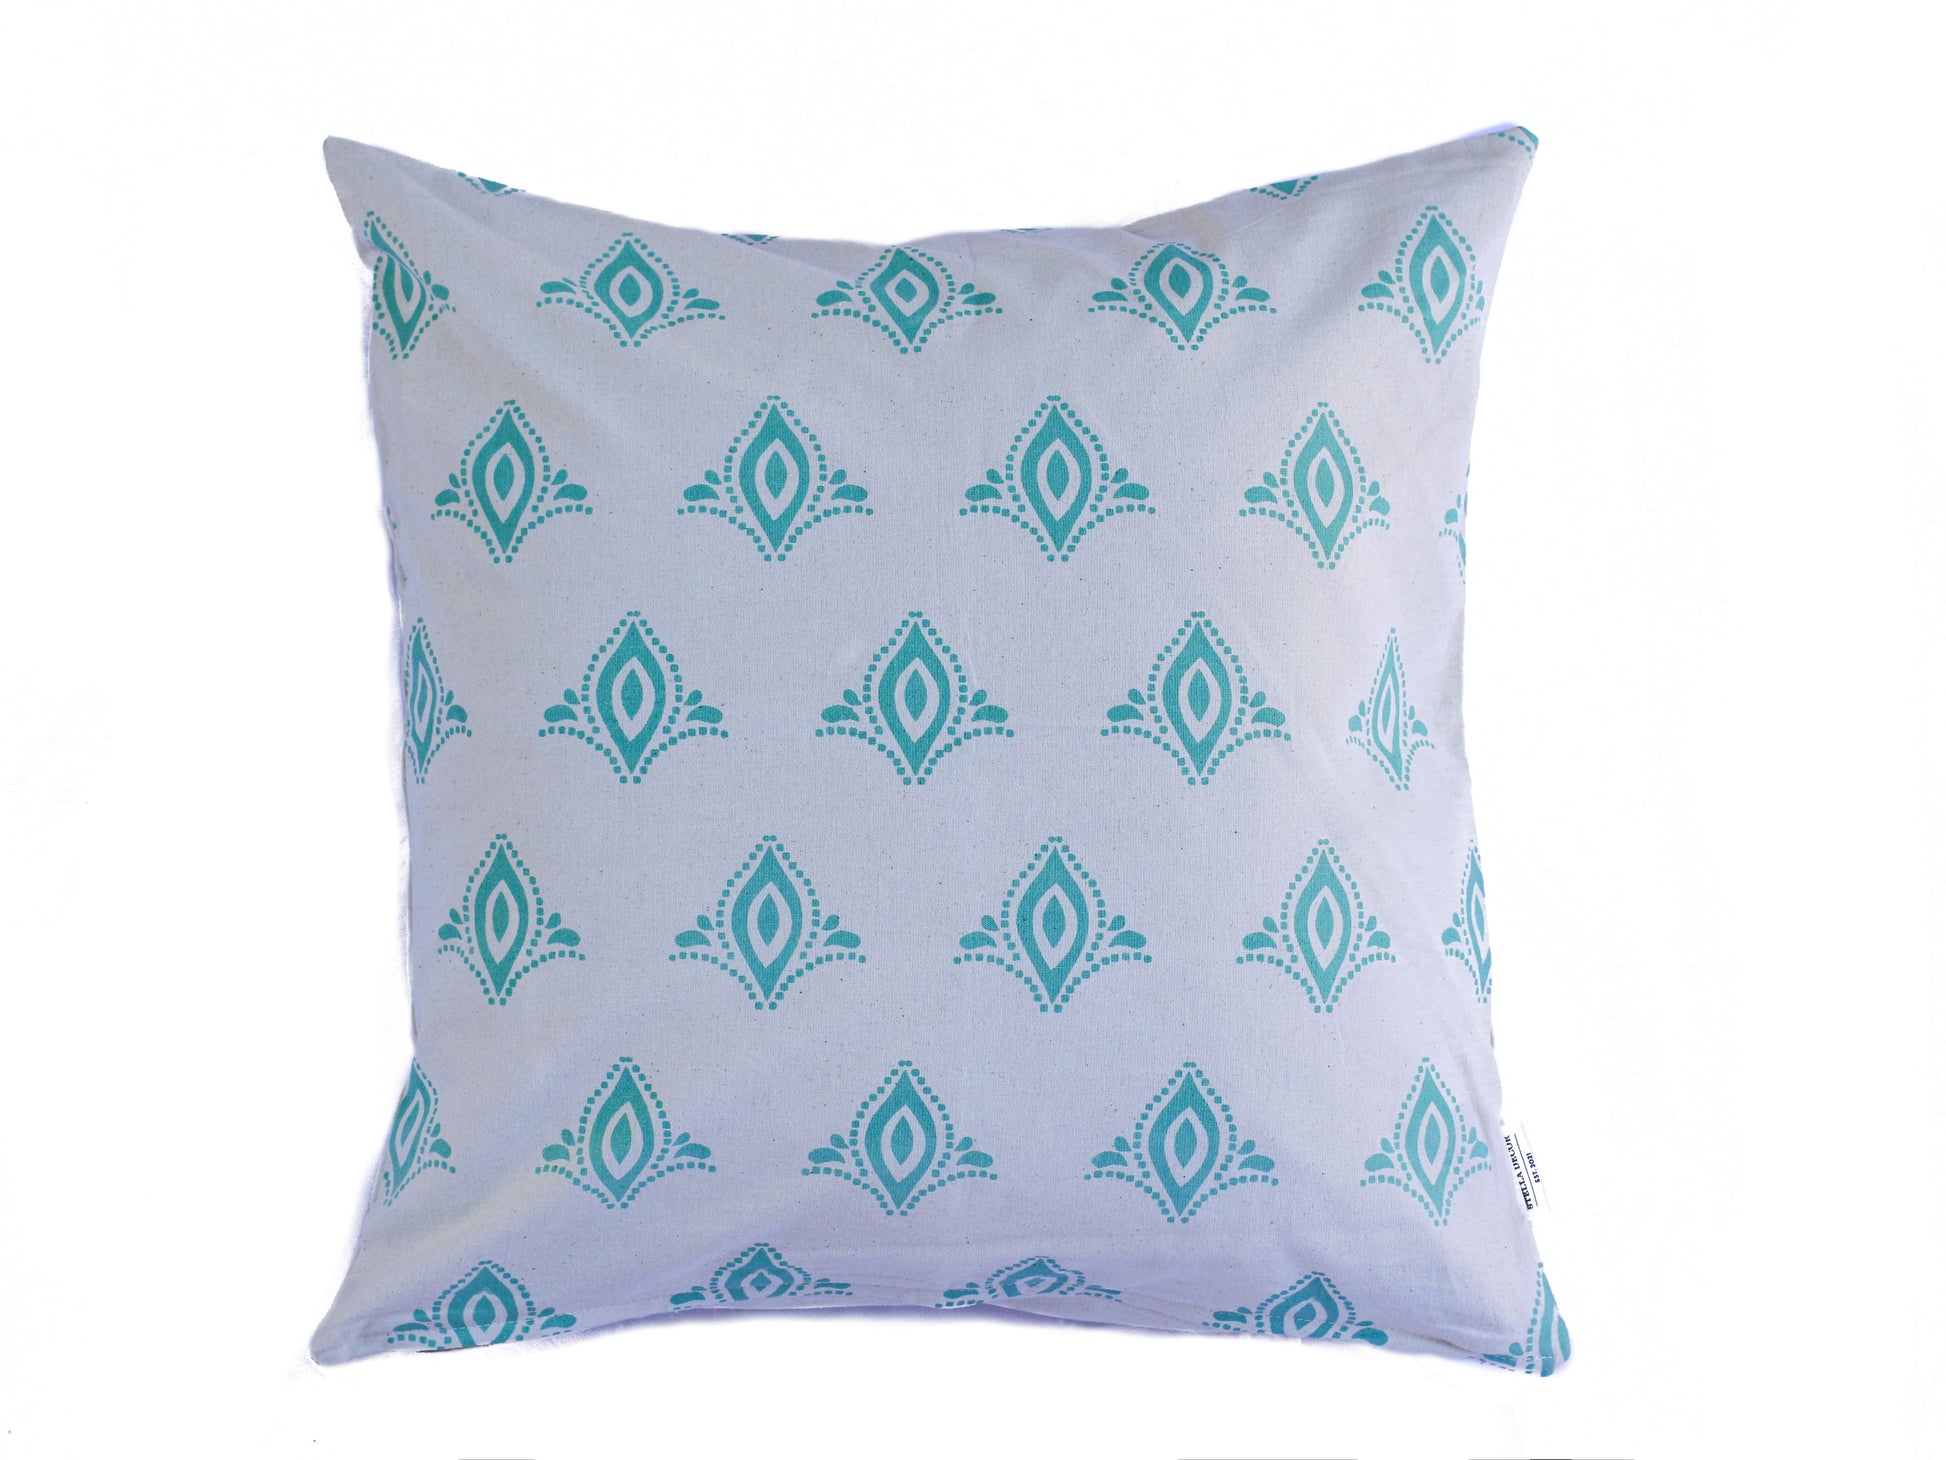 stella decor cushion cover in design spathiphyllum flower in color turquoise white